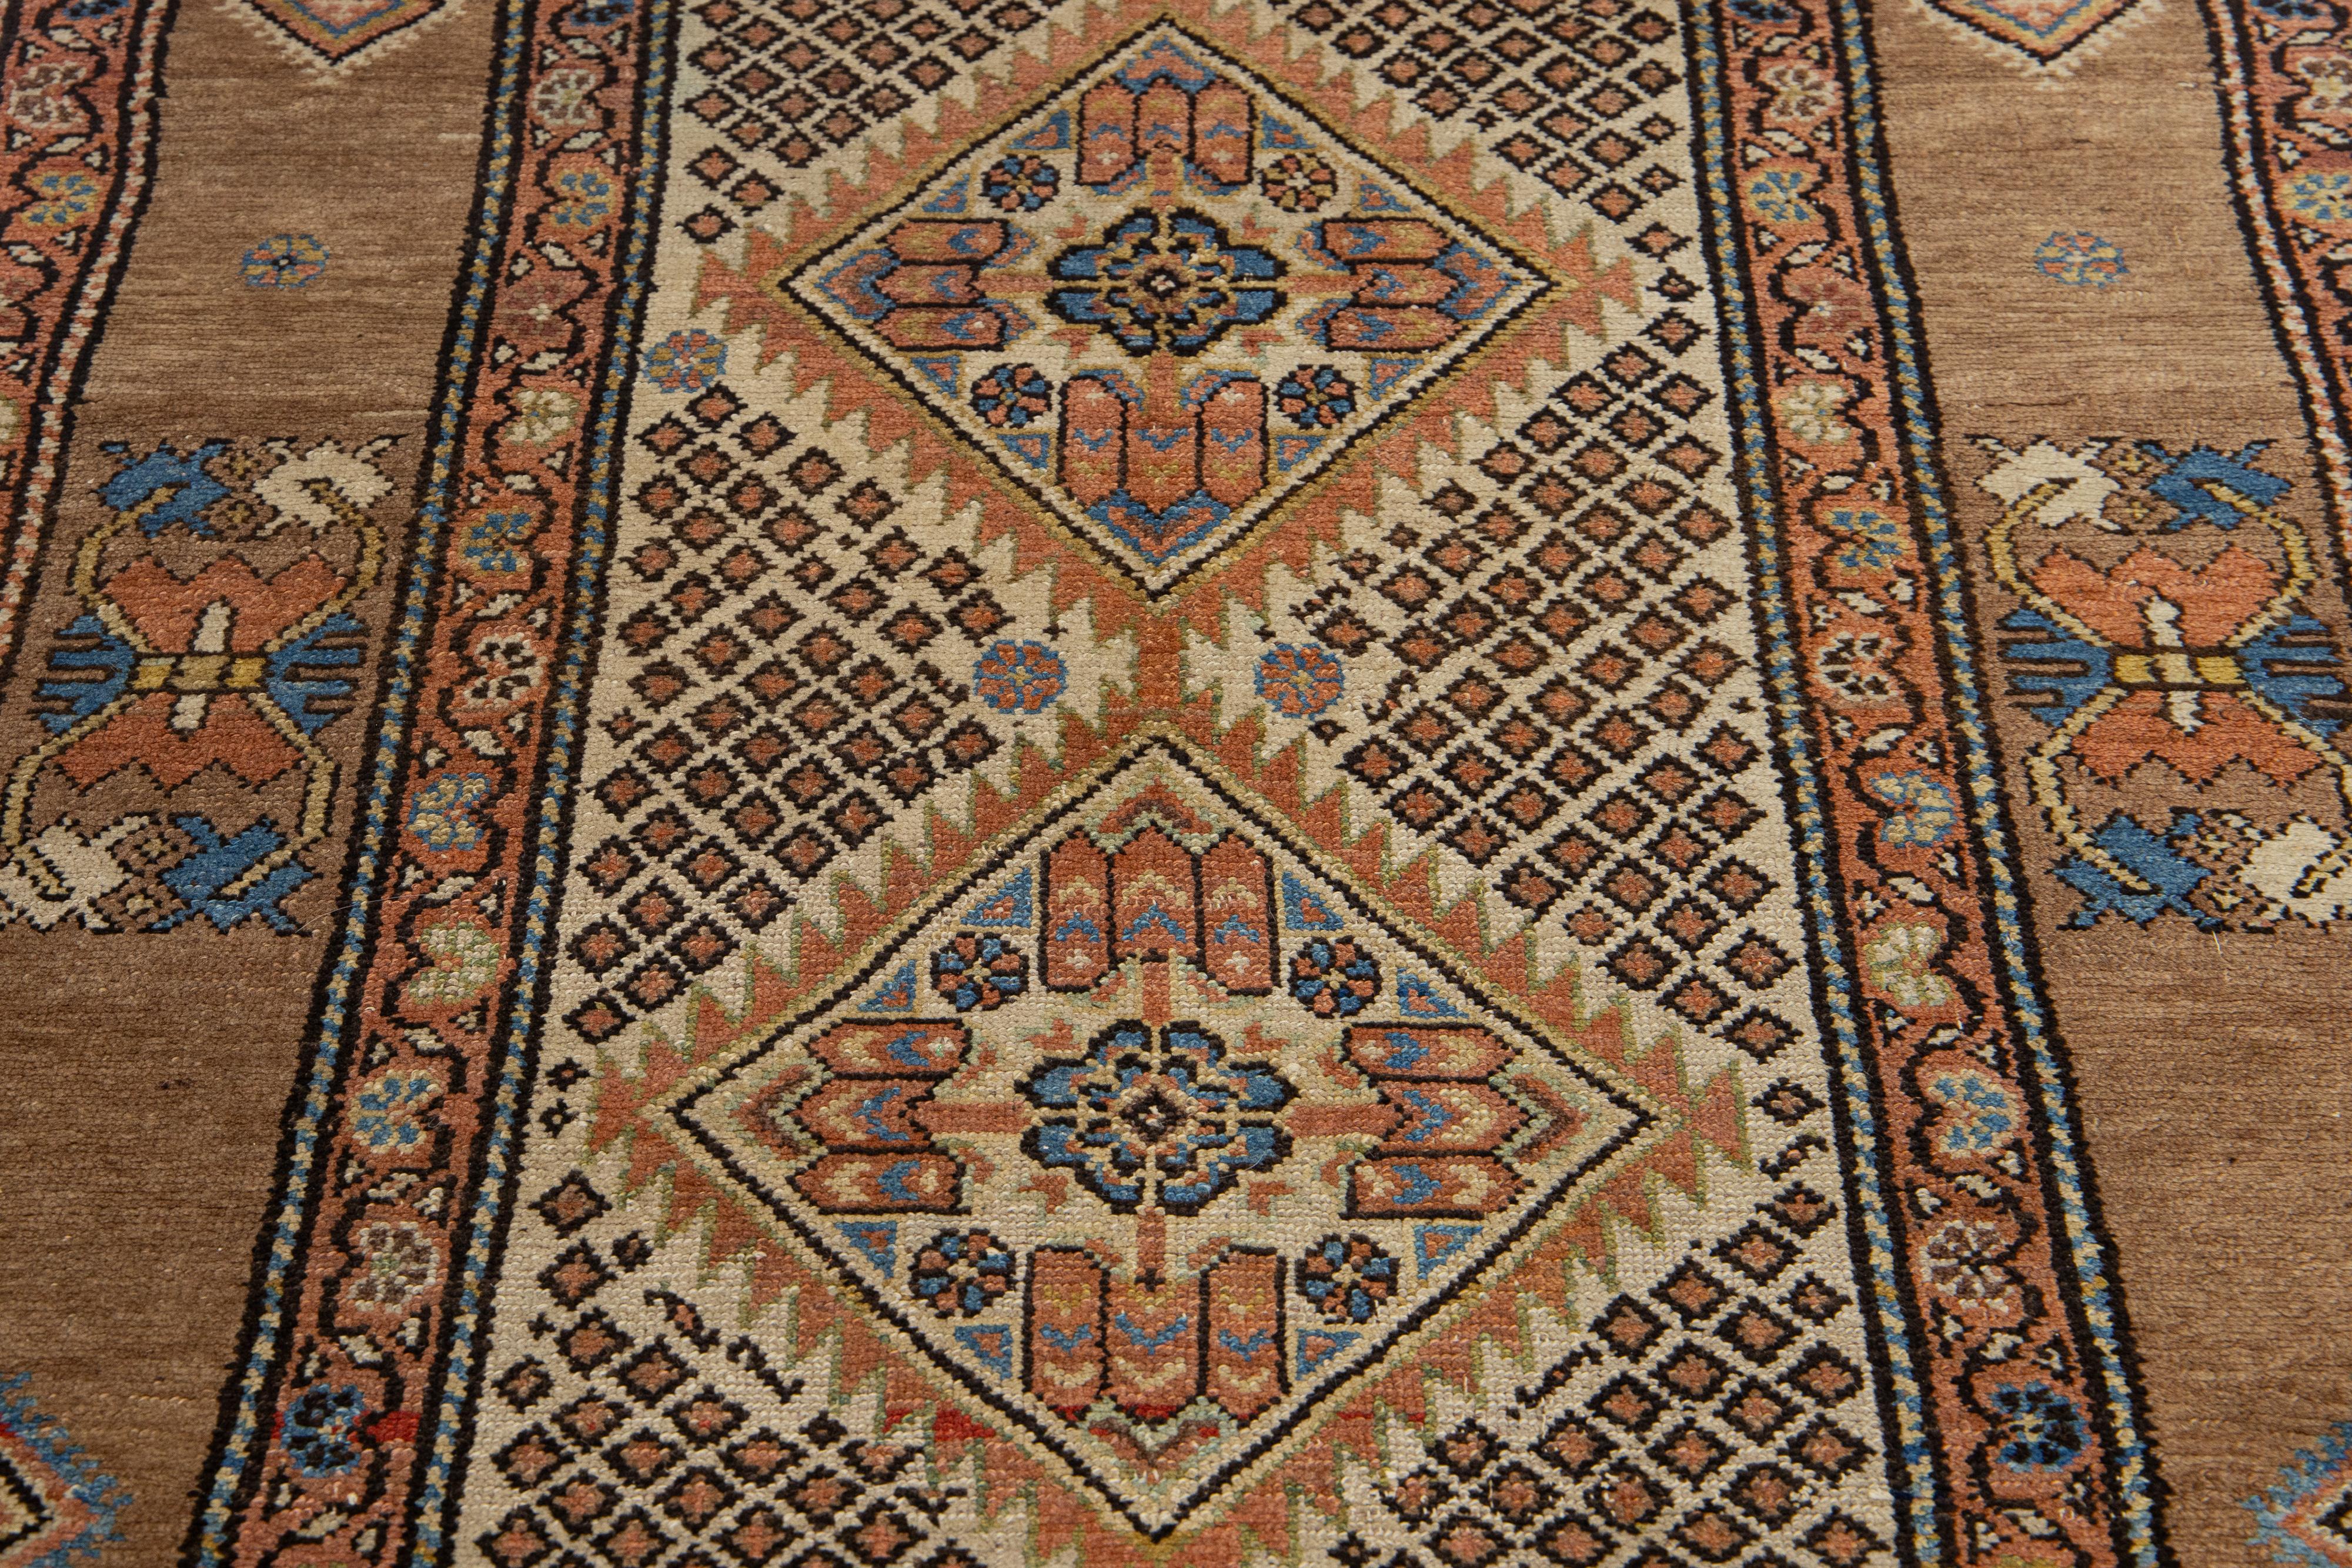 Tribal Designed Antique Wool Runner Persian Malayer From The 1900s In Beige For Sale 2